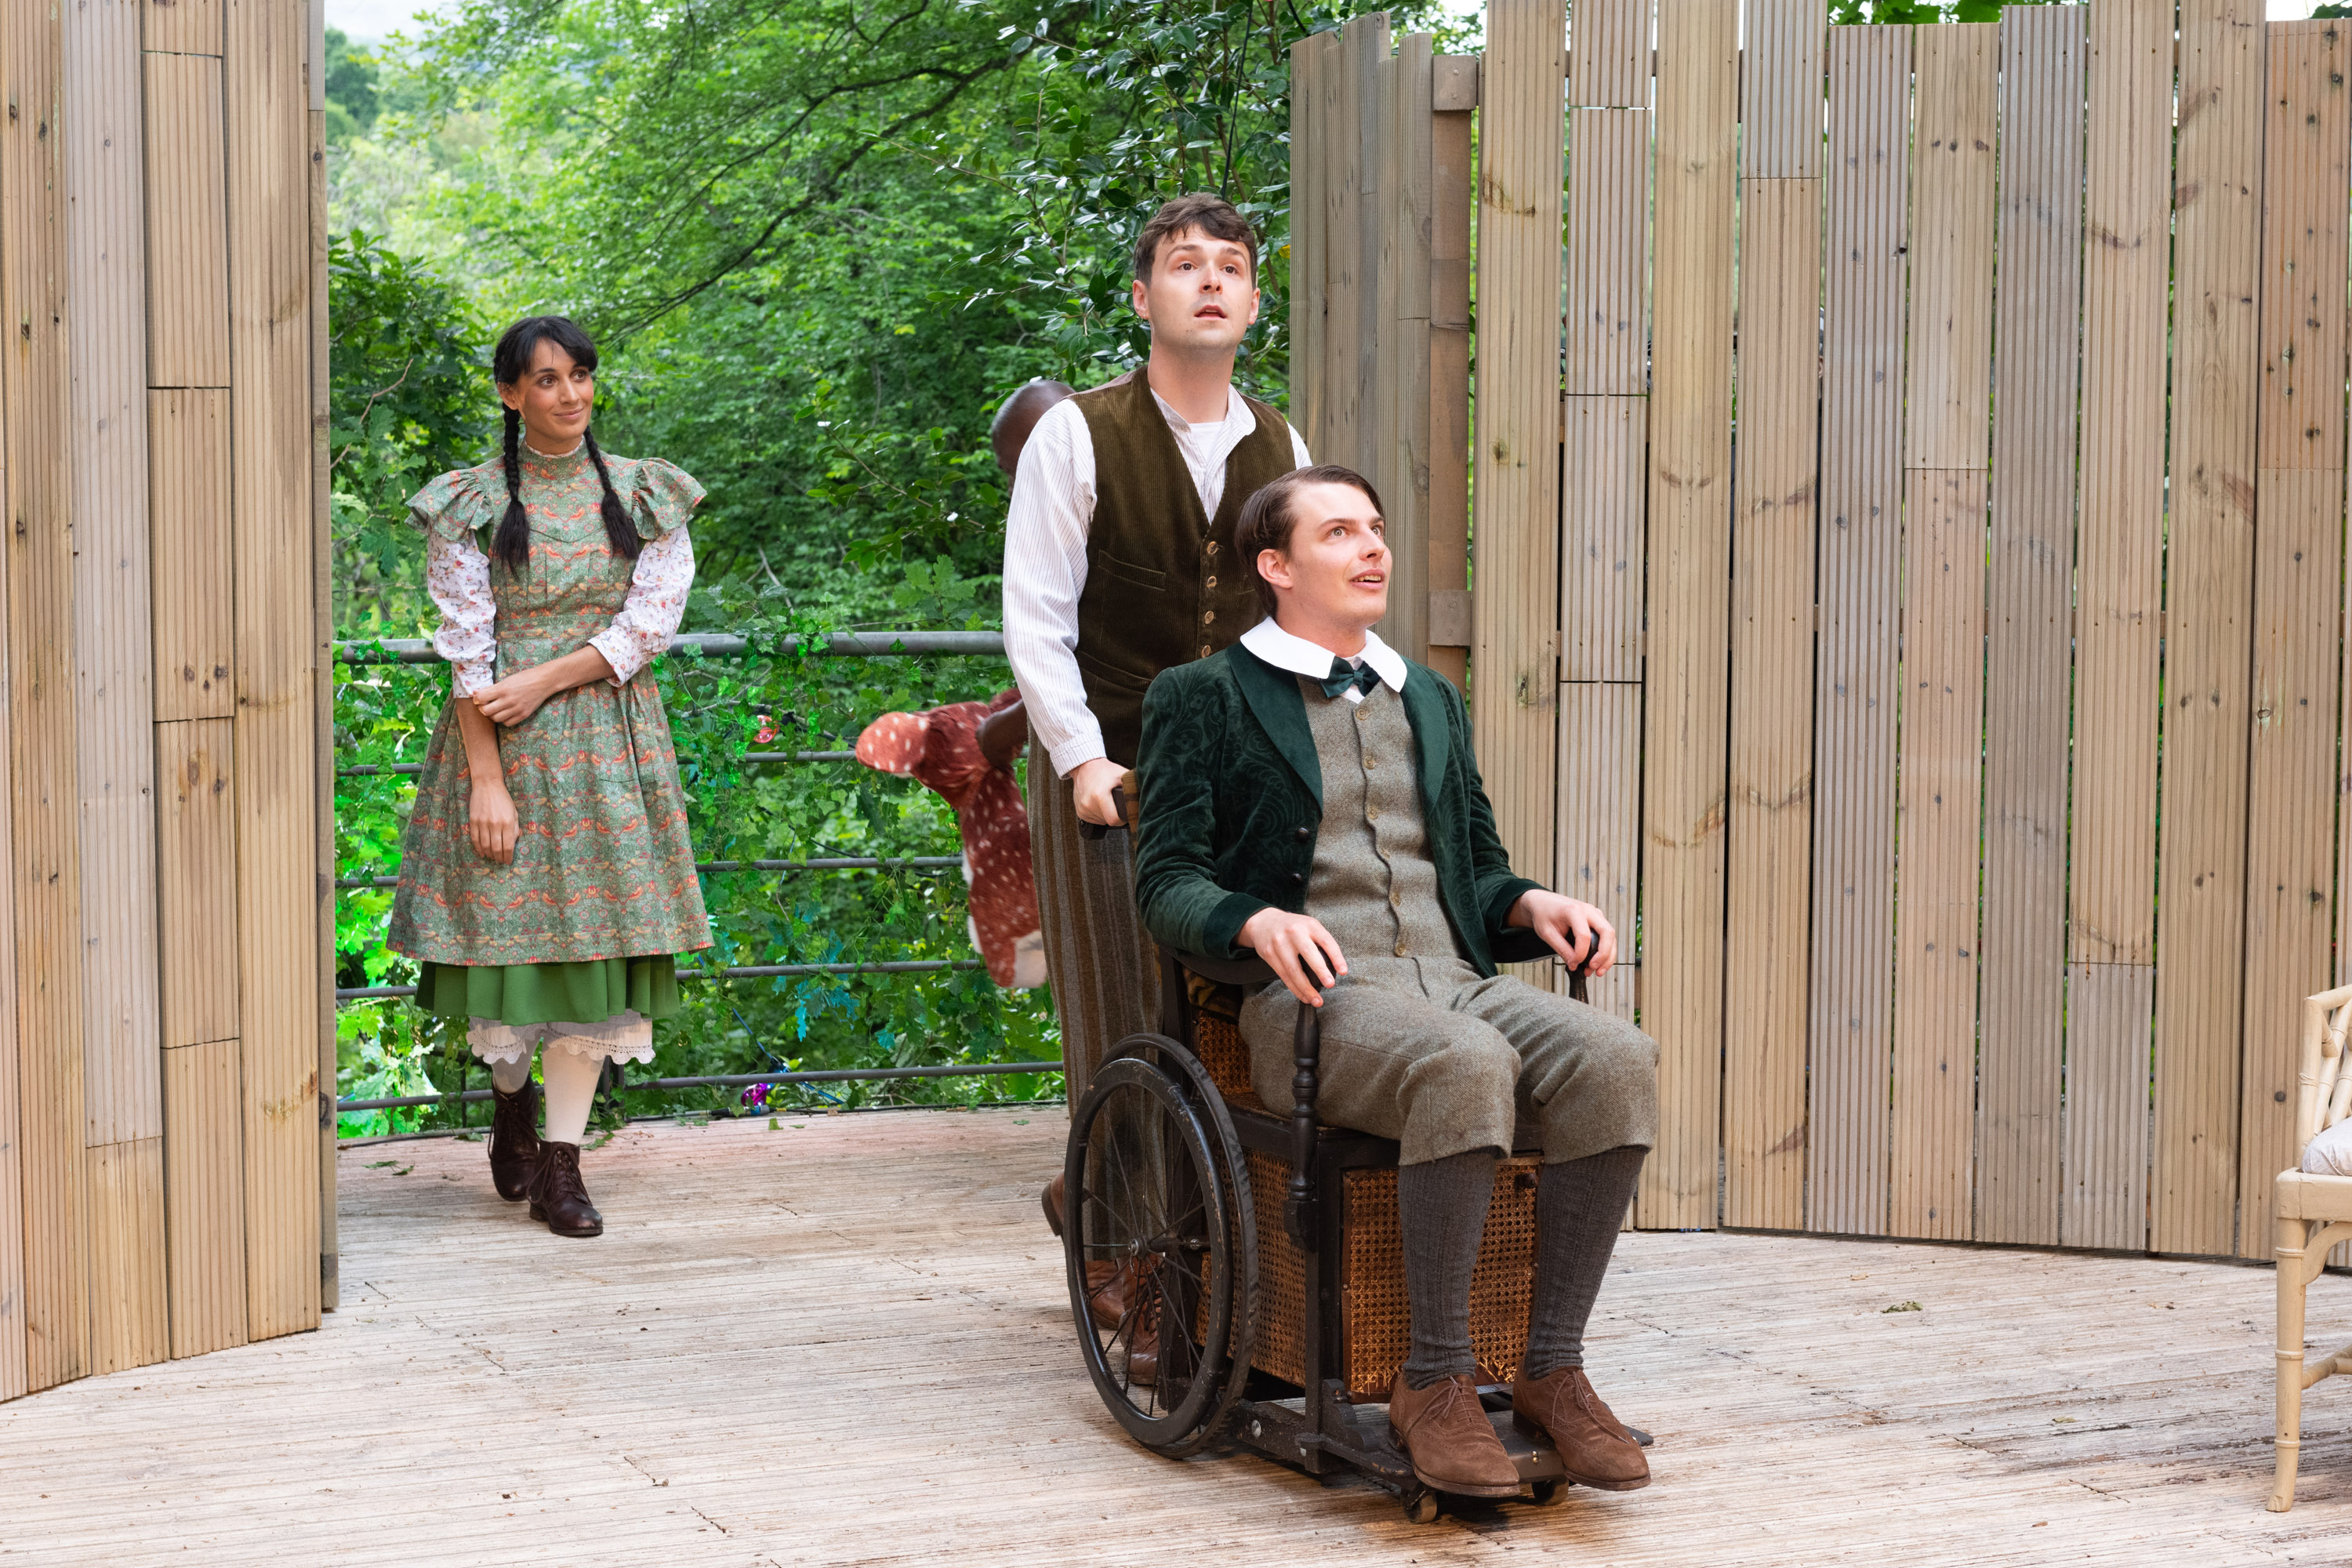 Three actors in period costumes on stage, one of whom is sat in a wheelchair